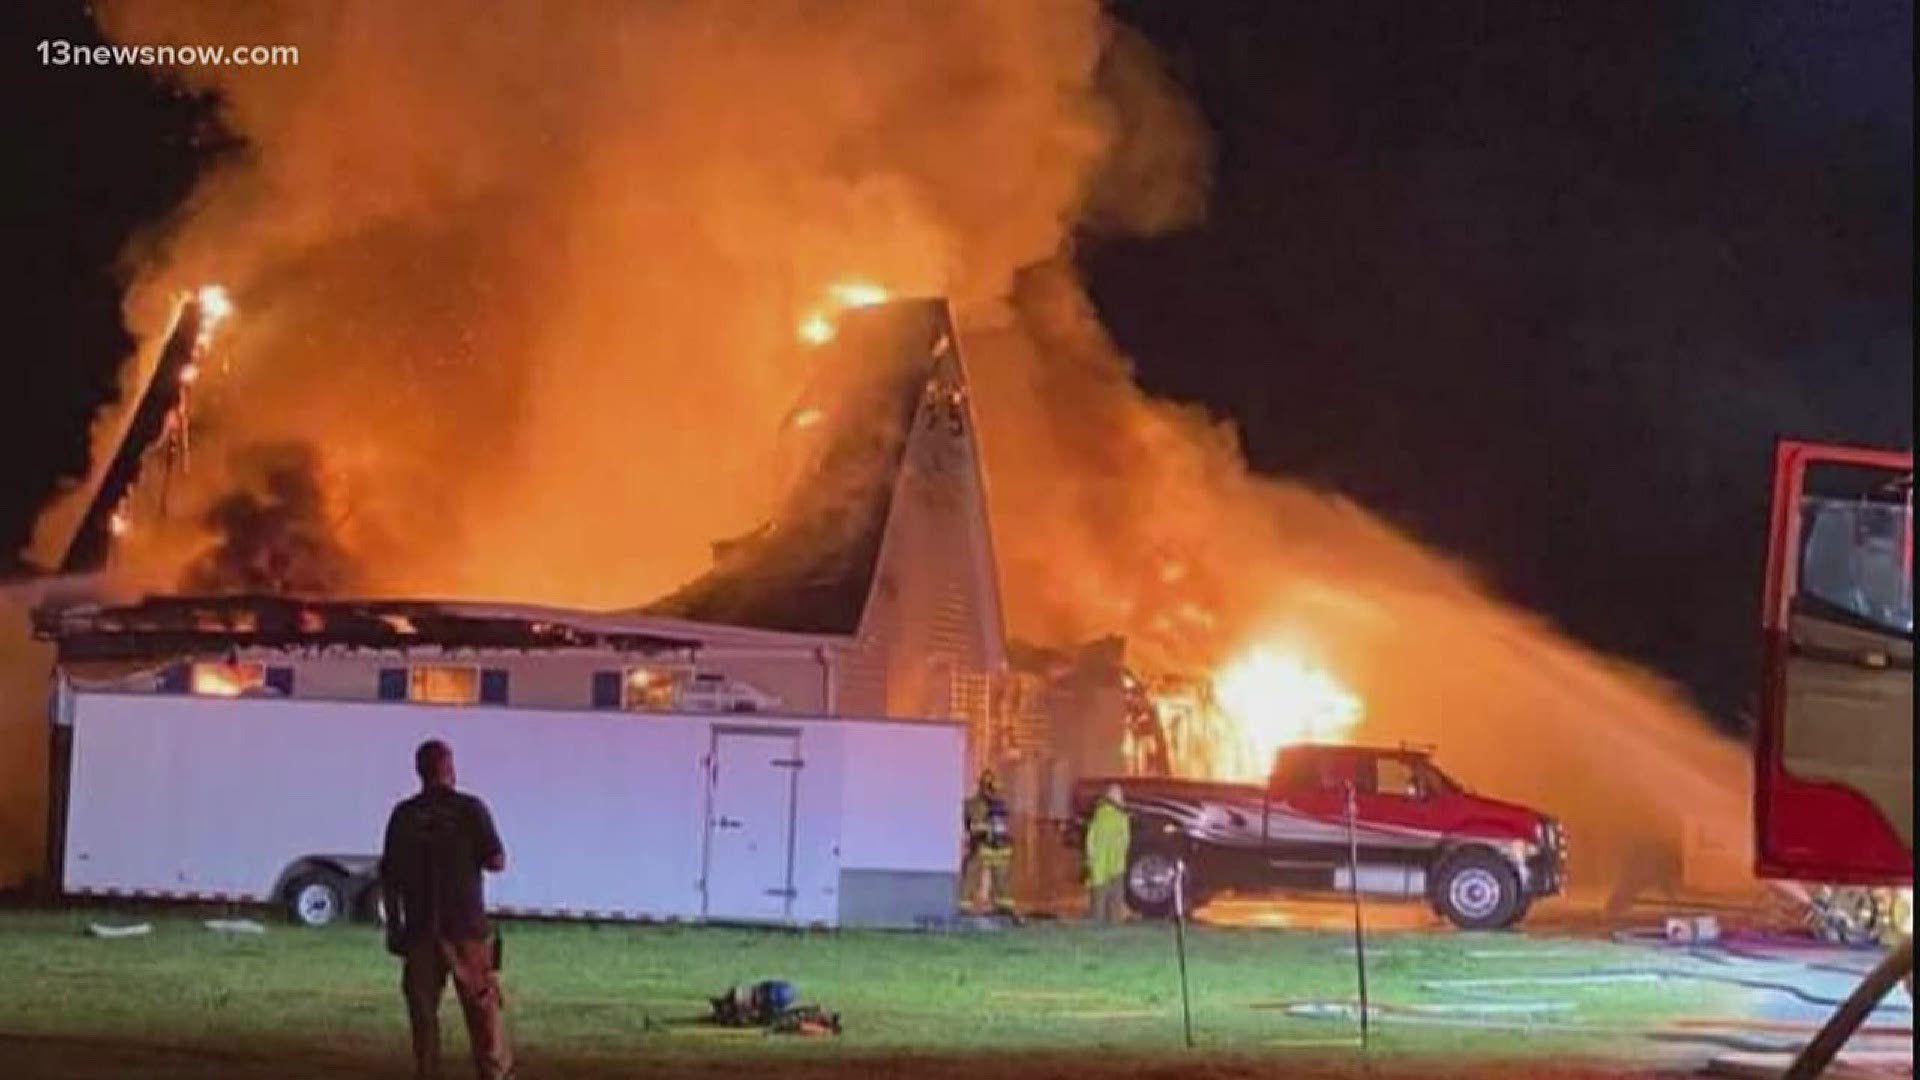 The fire happened in the town of Painter, Virginia in Accomack County.